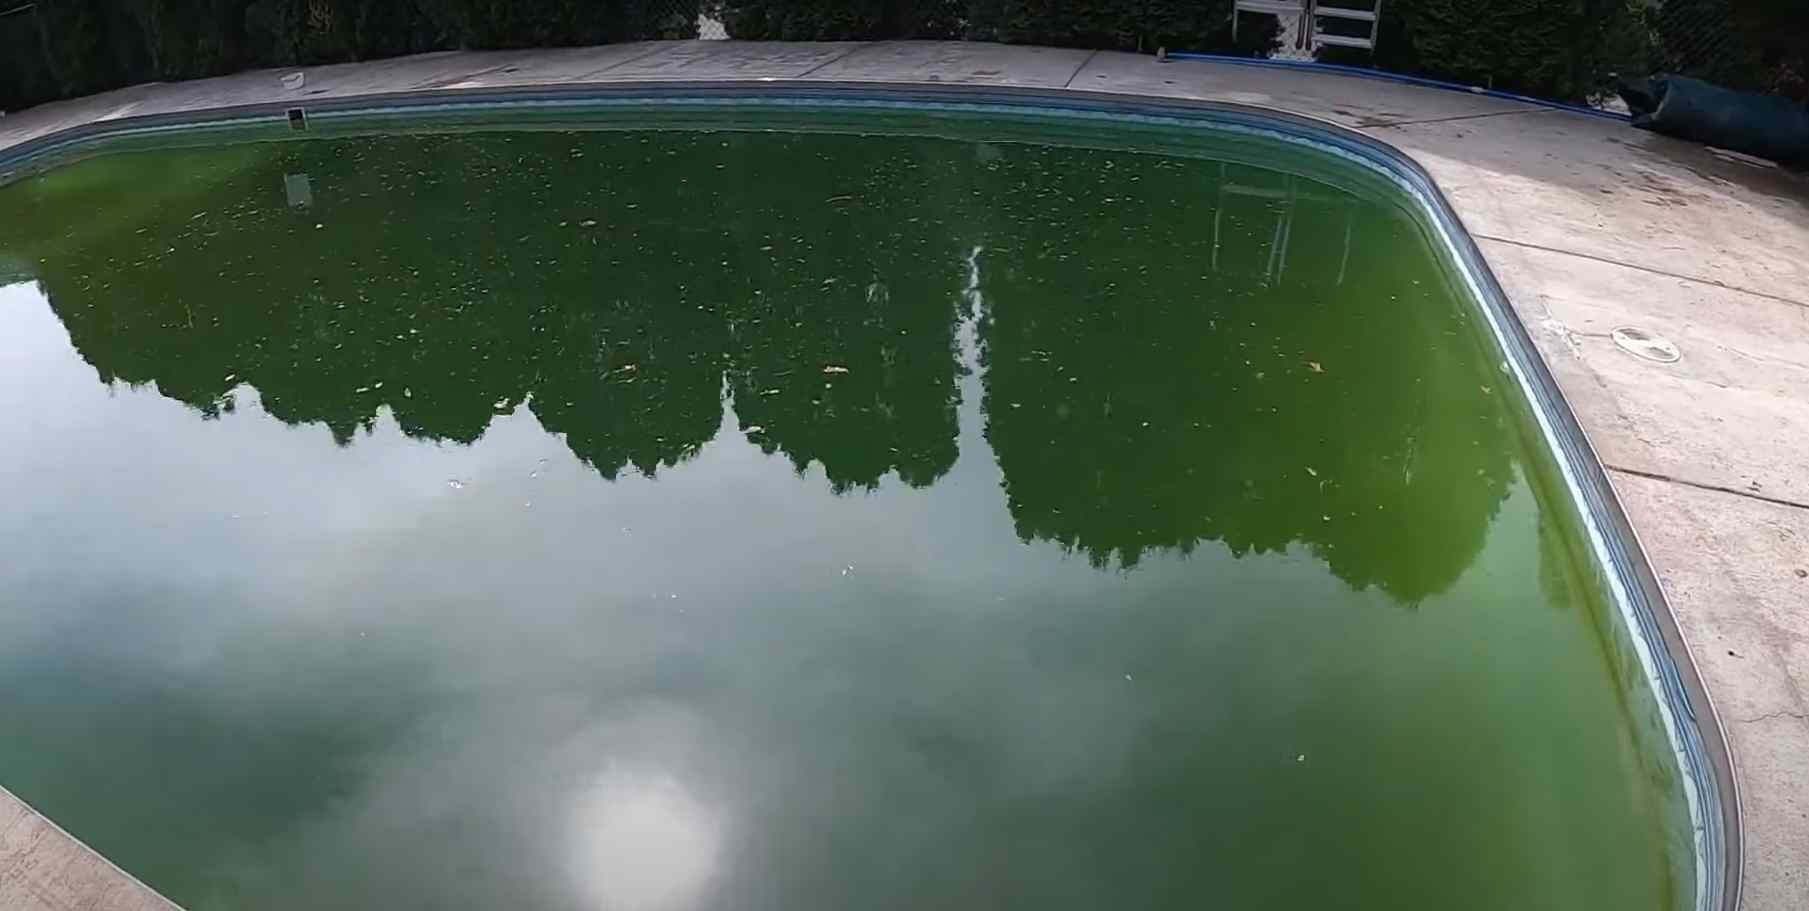 Green pool that needs to be cleaned